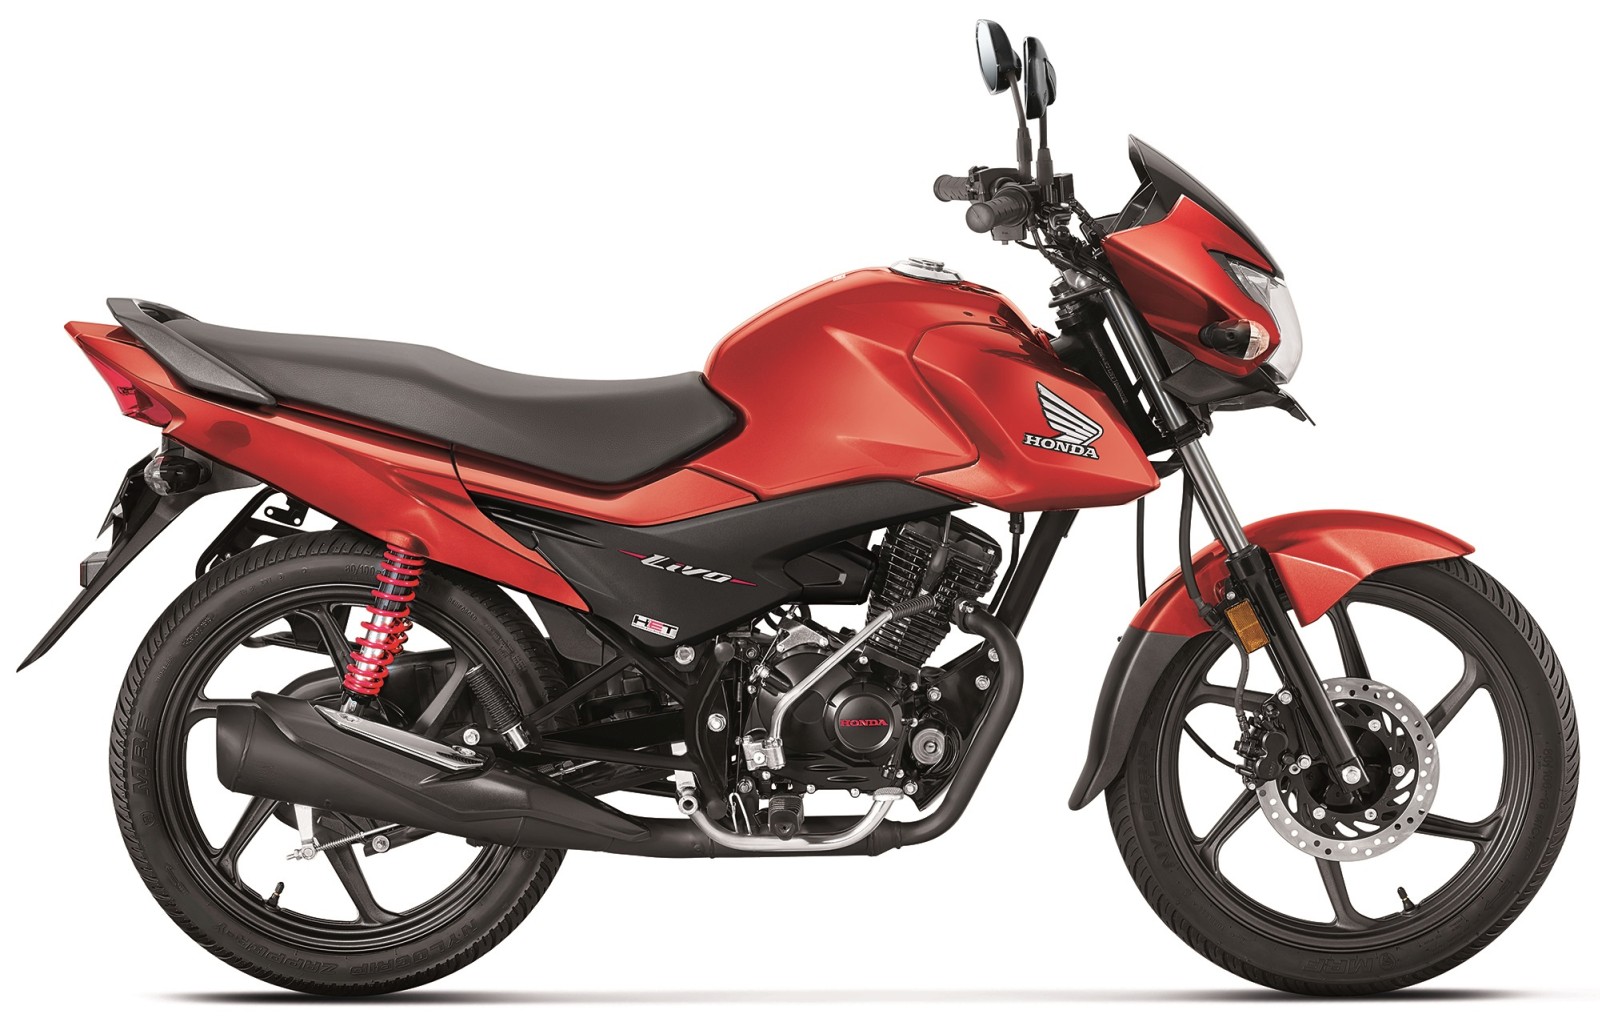 Honda Livo comes in a Two color shades